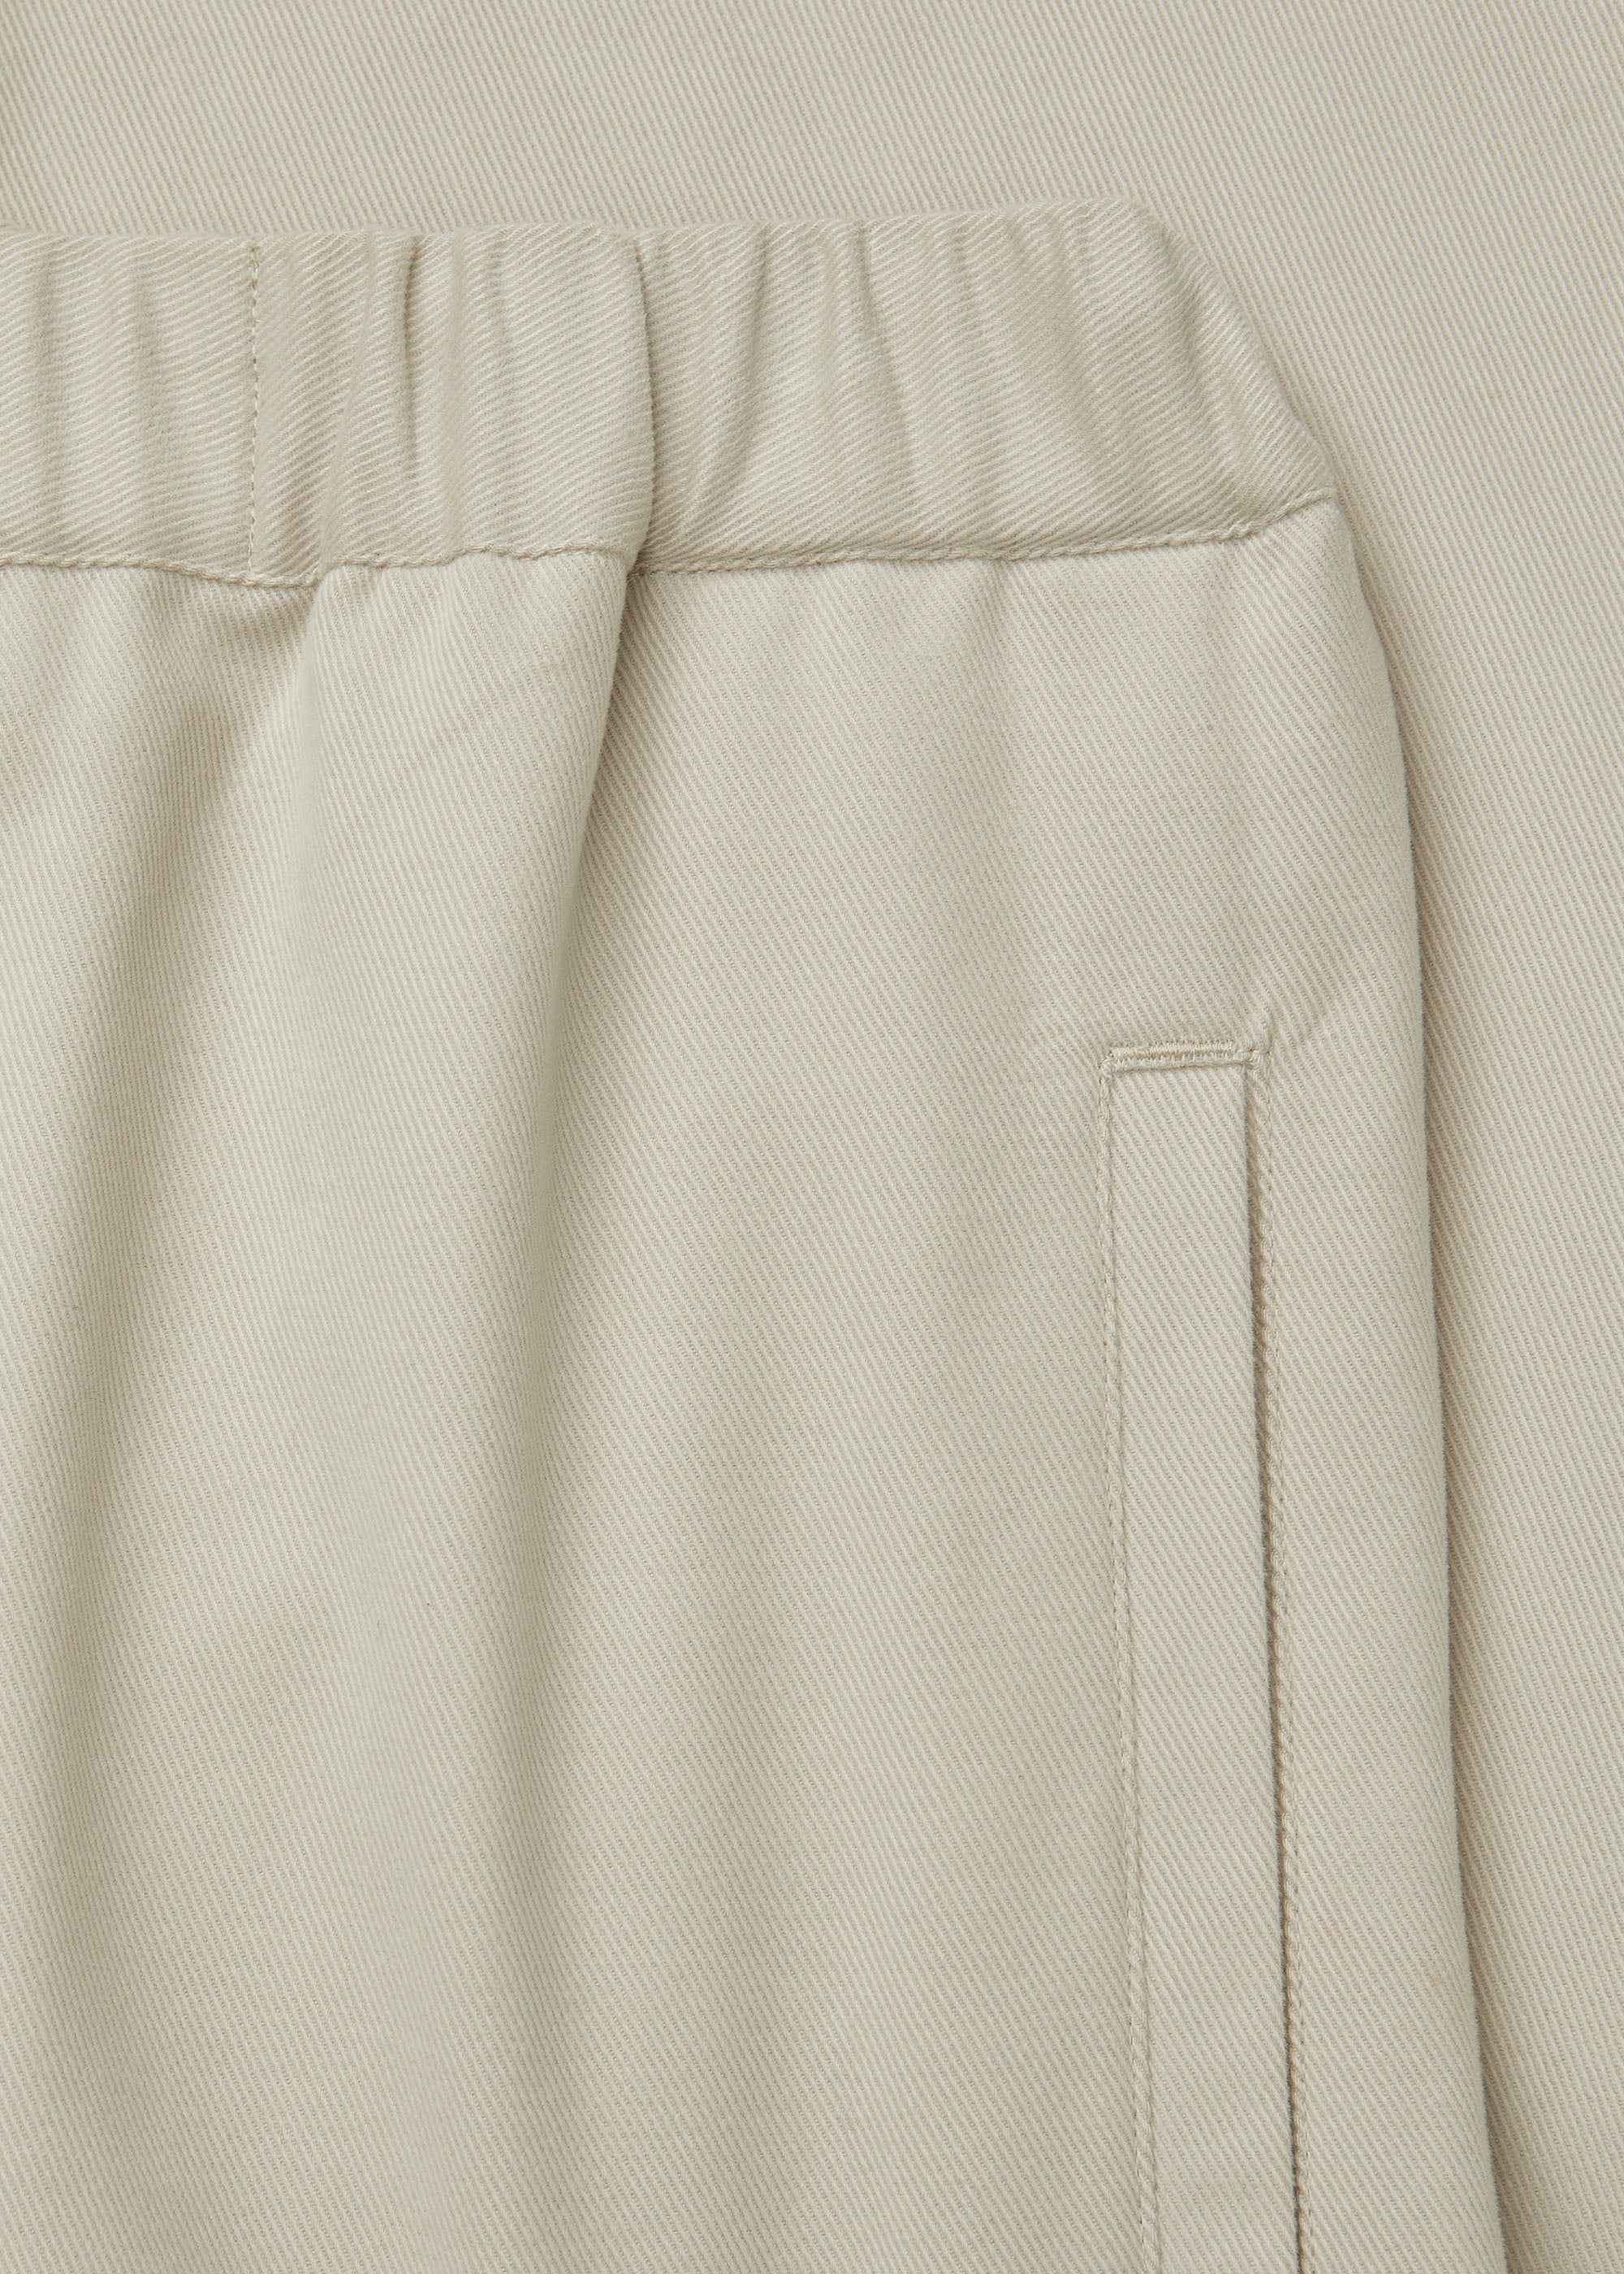 Coco pant tailored | Fossil